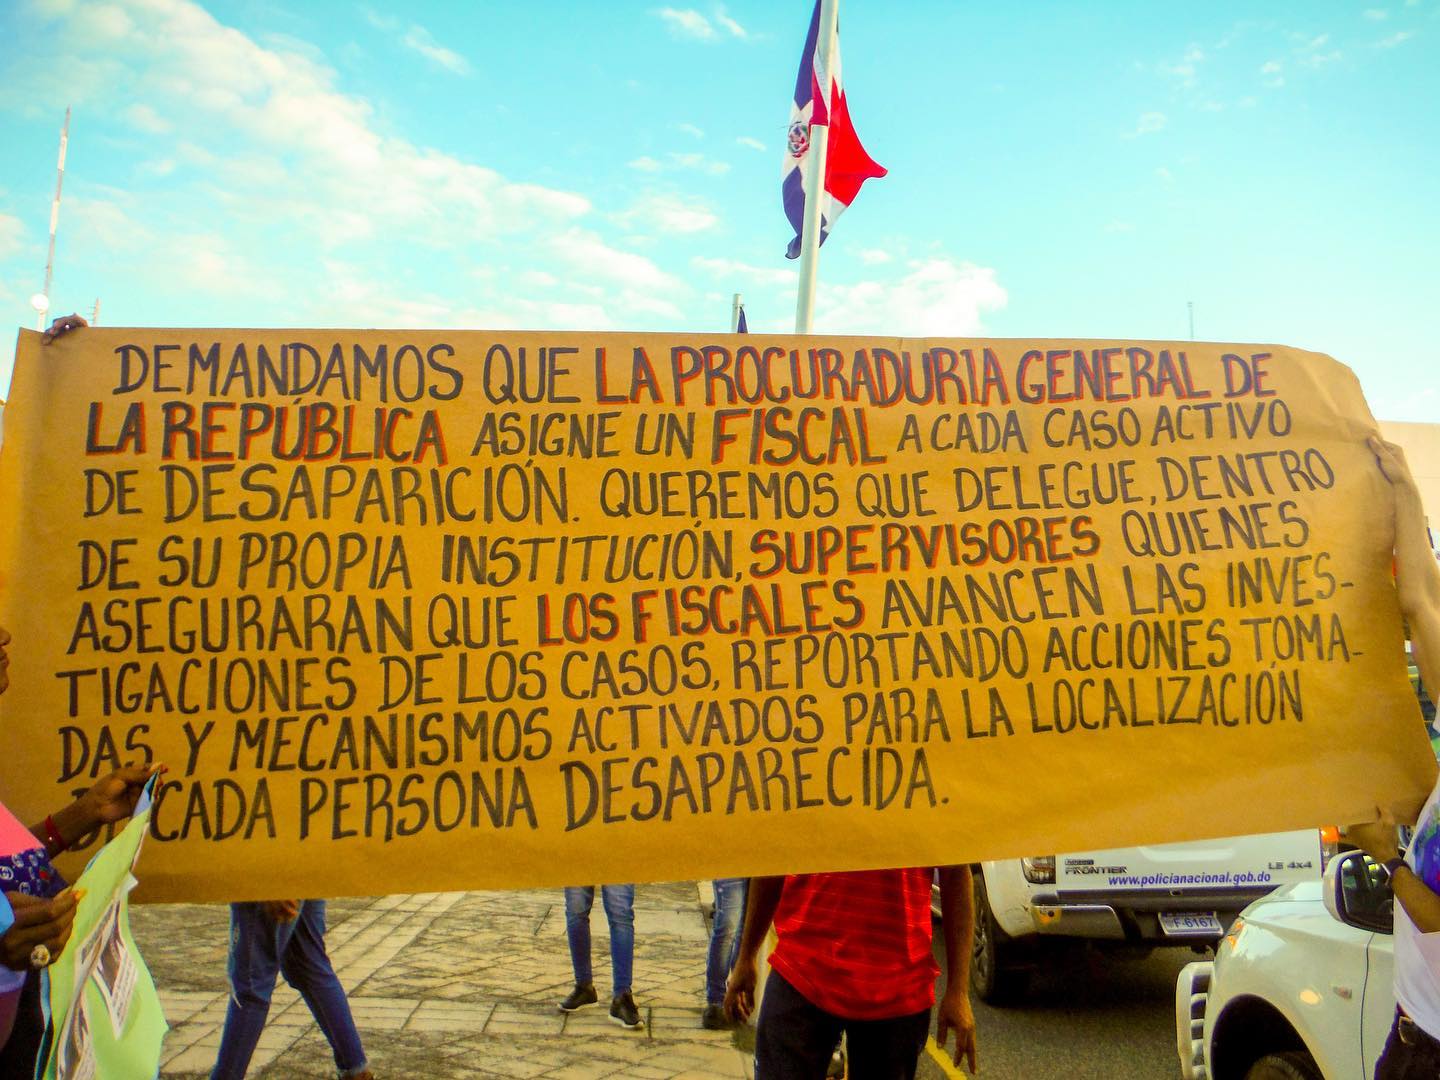 A photo of a protest sign demanding the Dominican Government to provide better processes for reporting and investigating the instances of missing people